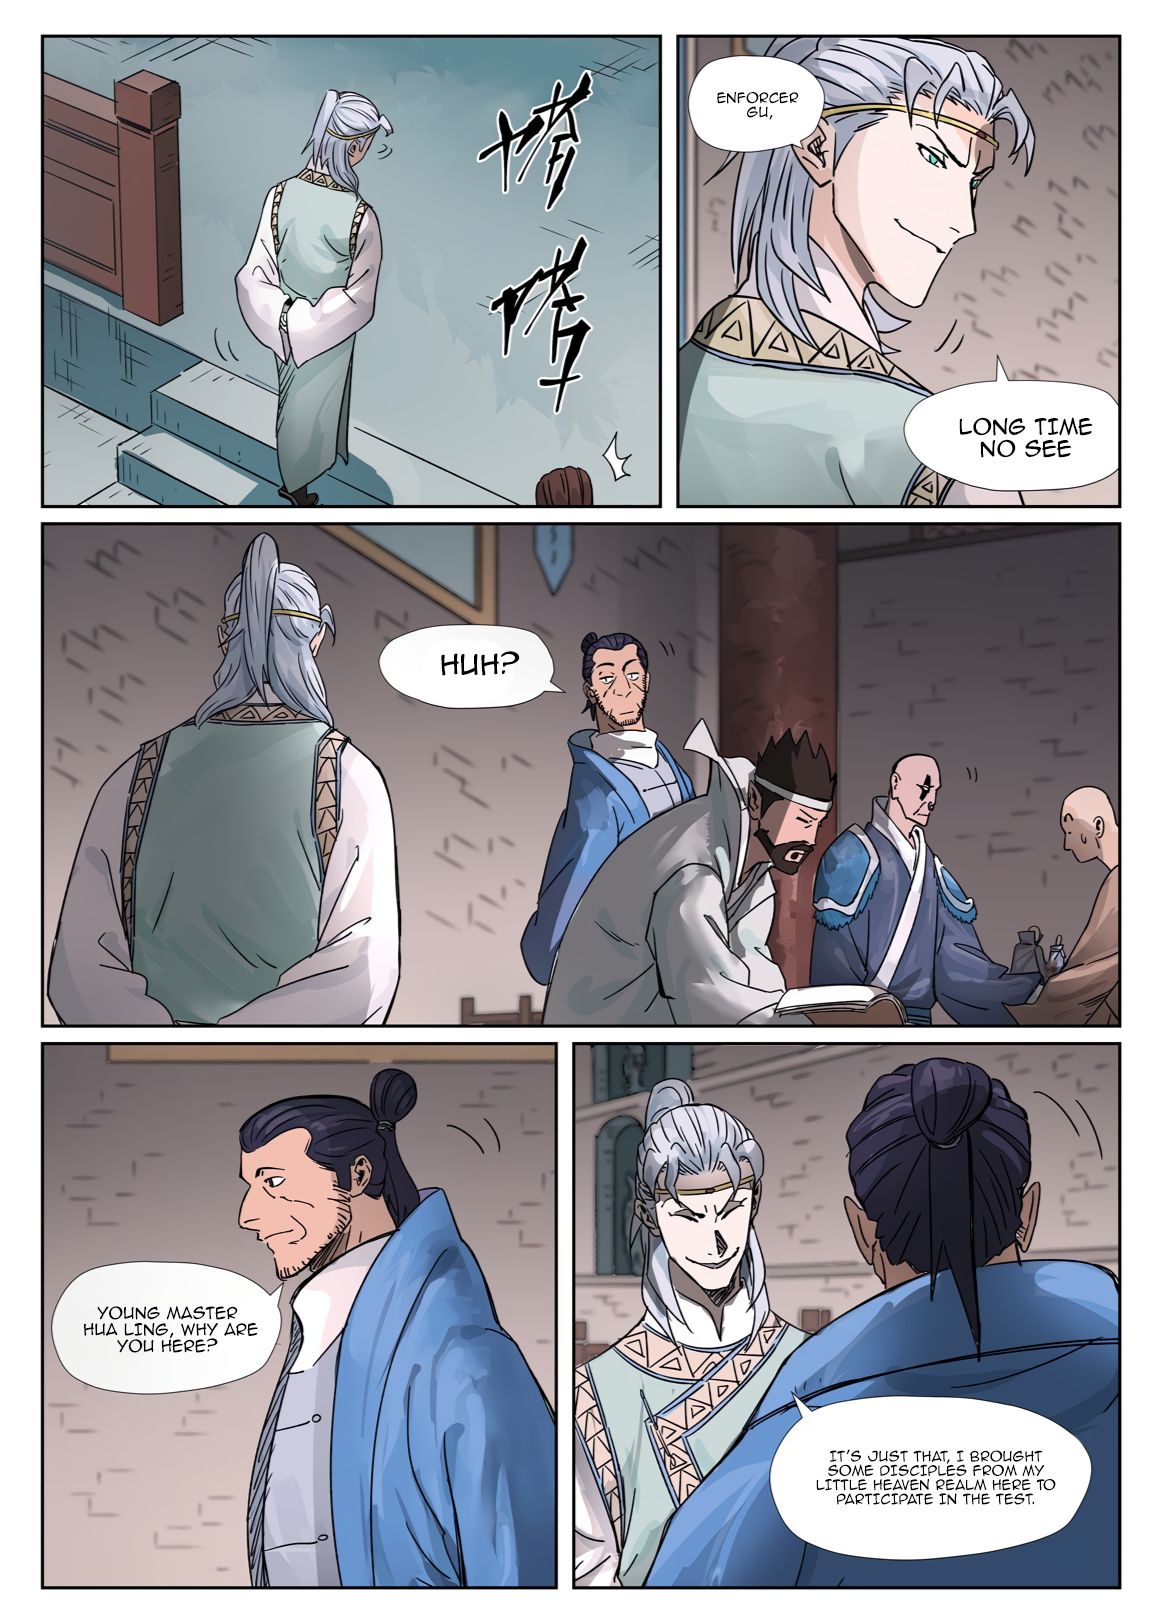 Tales of Demons and Gods Manhua Chapter 298.5 - Page 1